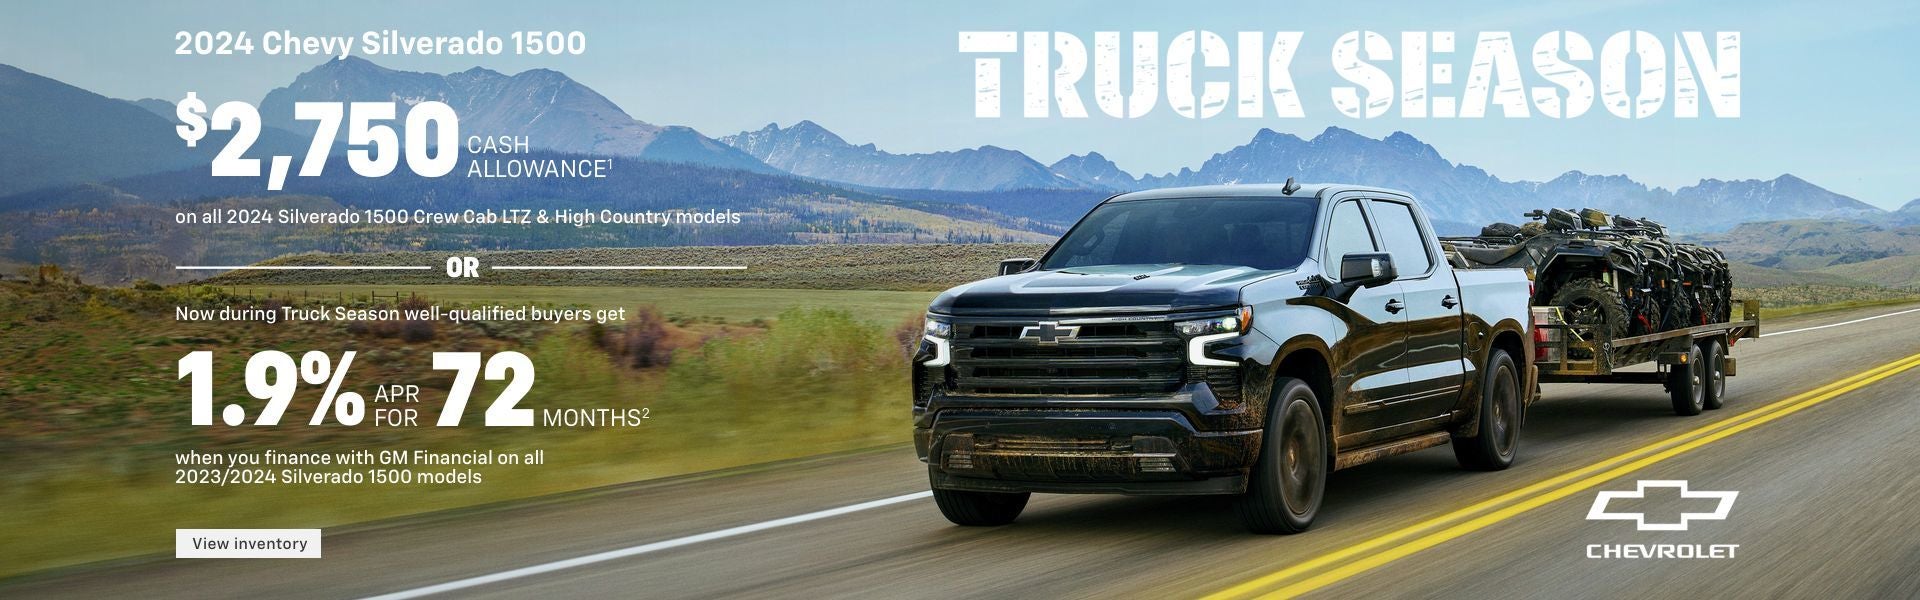 $2,750 cash allowance. Or, now during Truck Season well-qualified buyers get 2.9% APR for 72 mont...